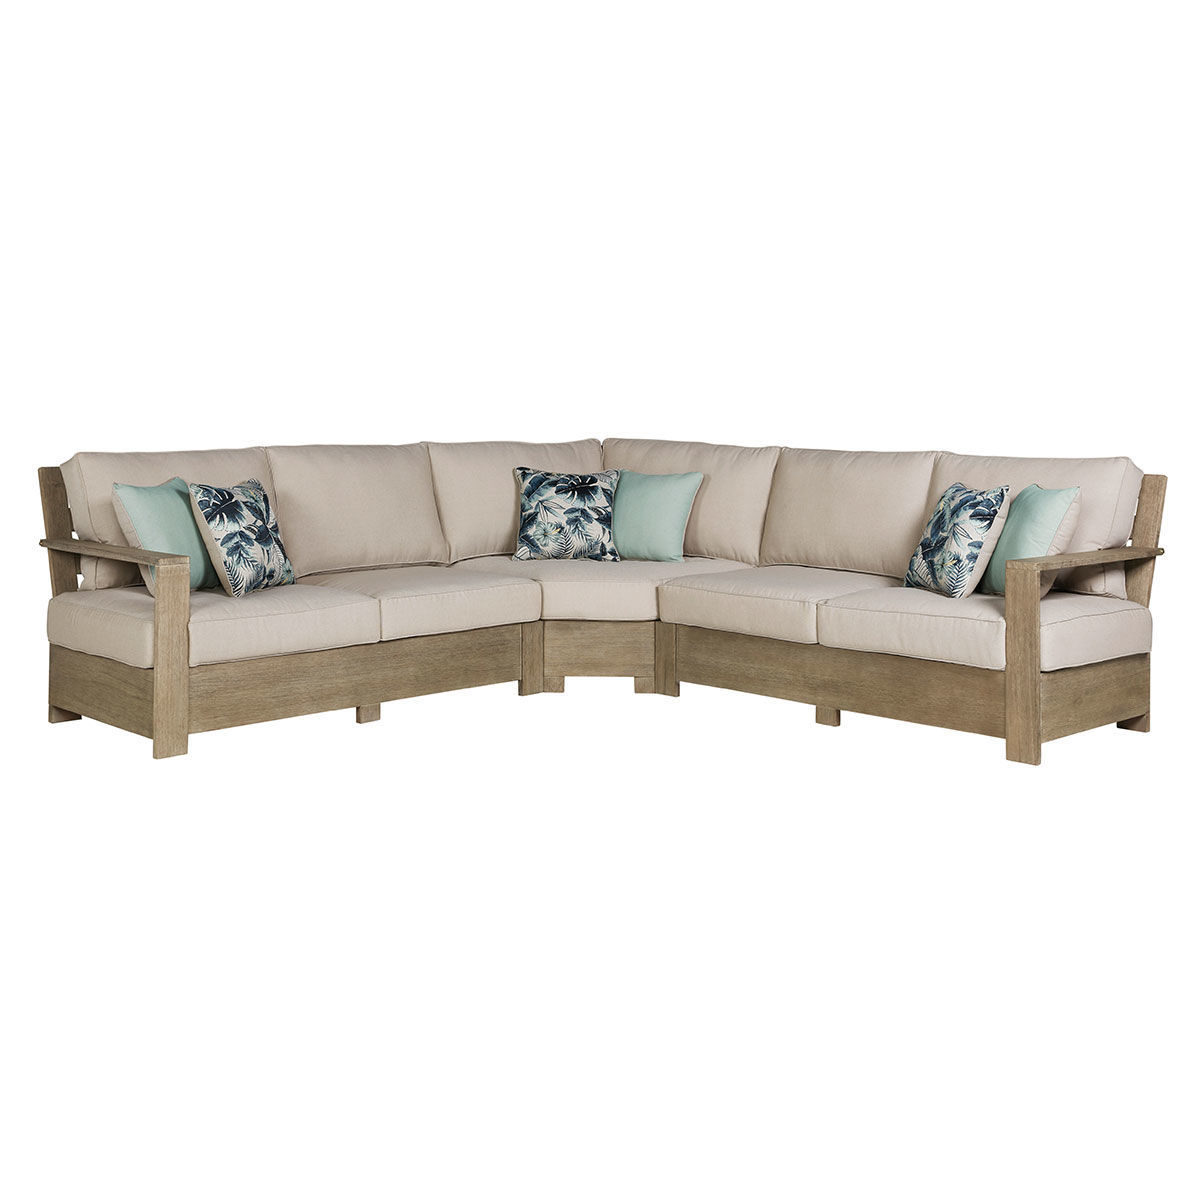 Picture of PANAMA 3PC PATIO SECTIONAL KIT